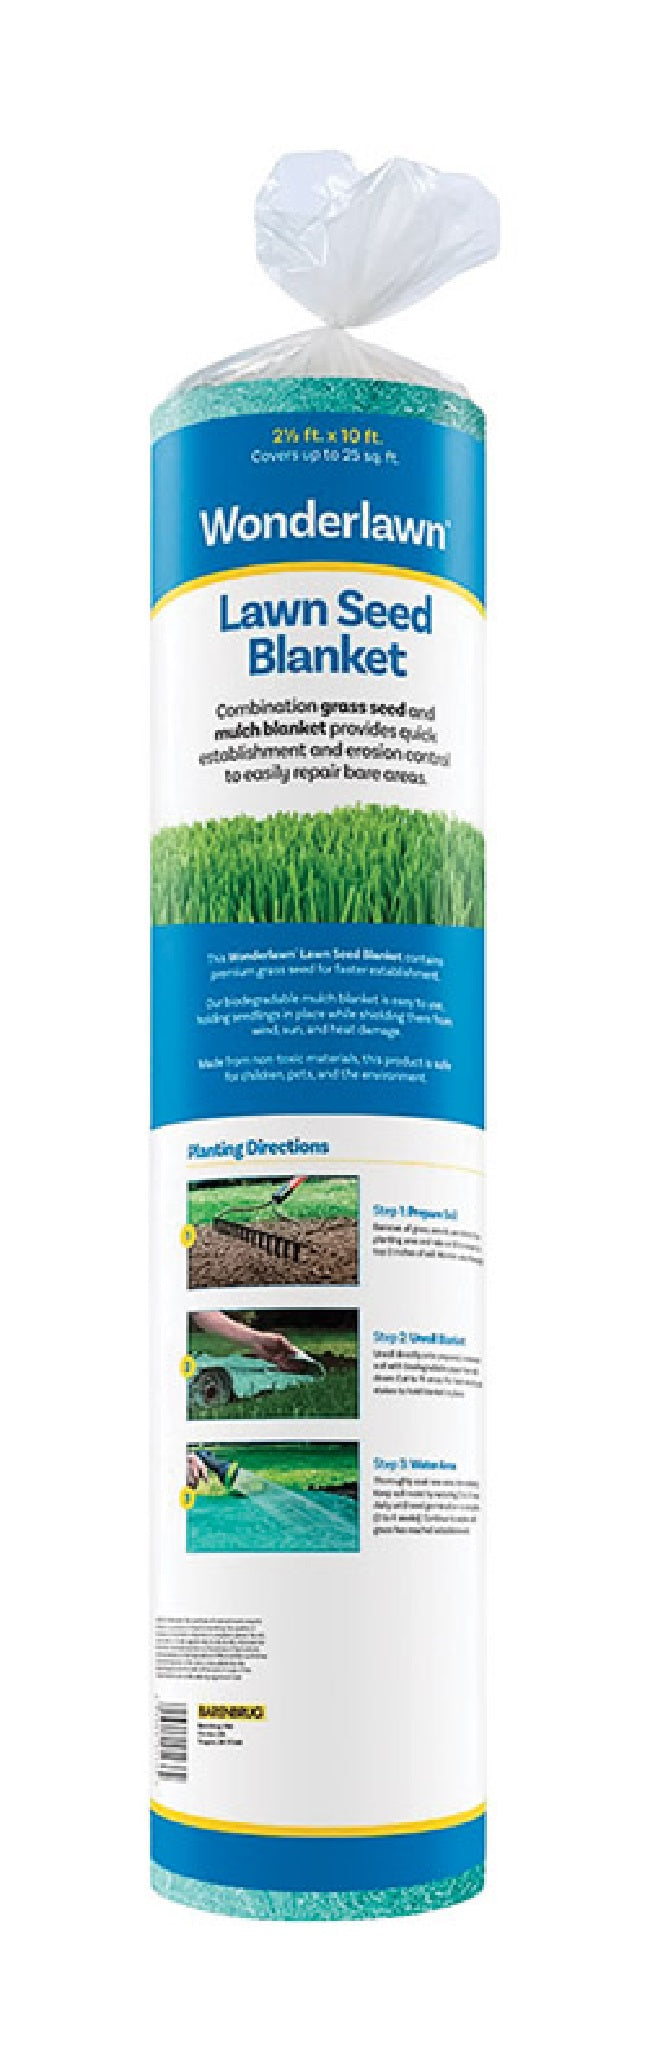 Buy wonderlawn seed blanket - Online store for seed starting, grass  in USA, on sale, low price, discount deals, coupon code